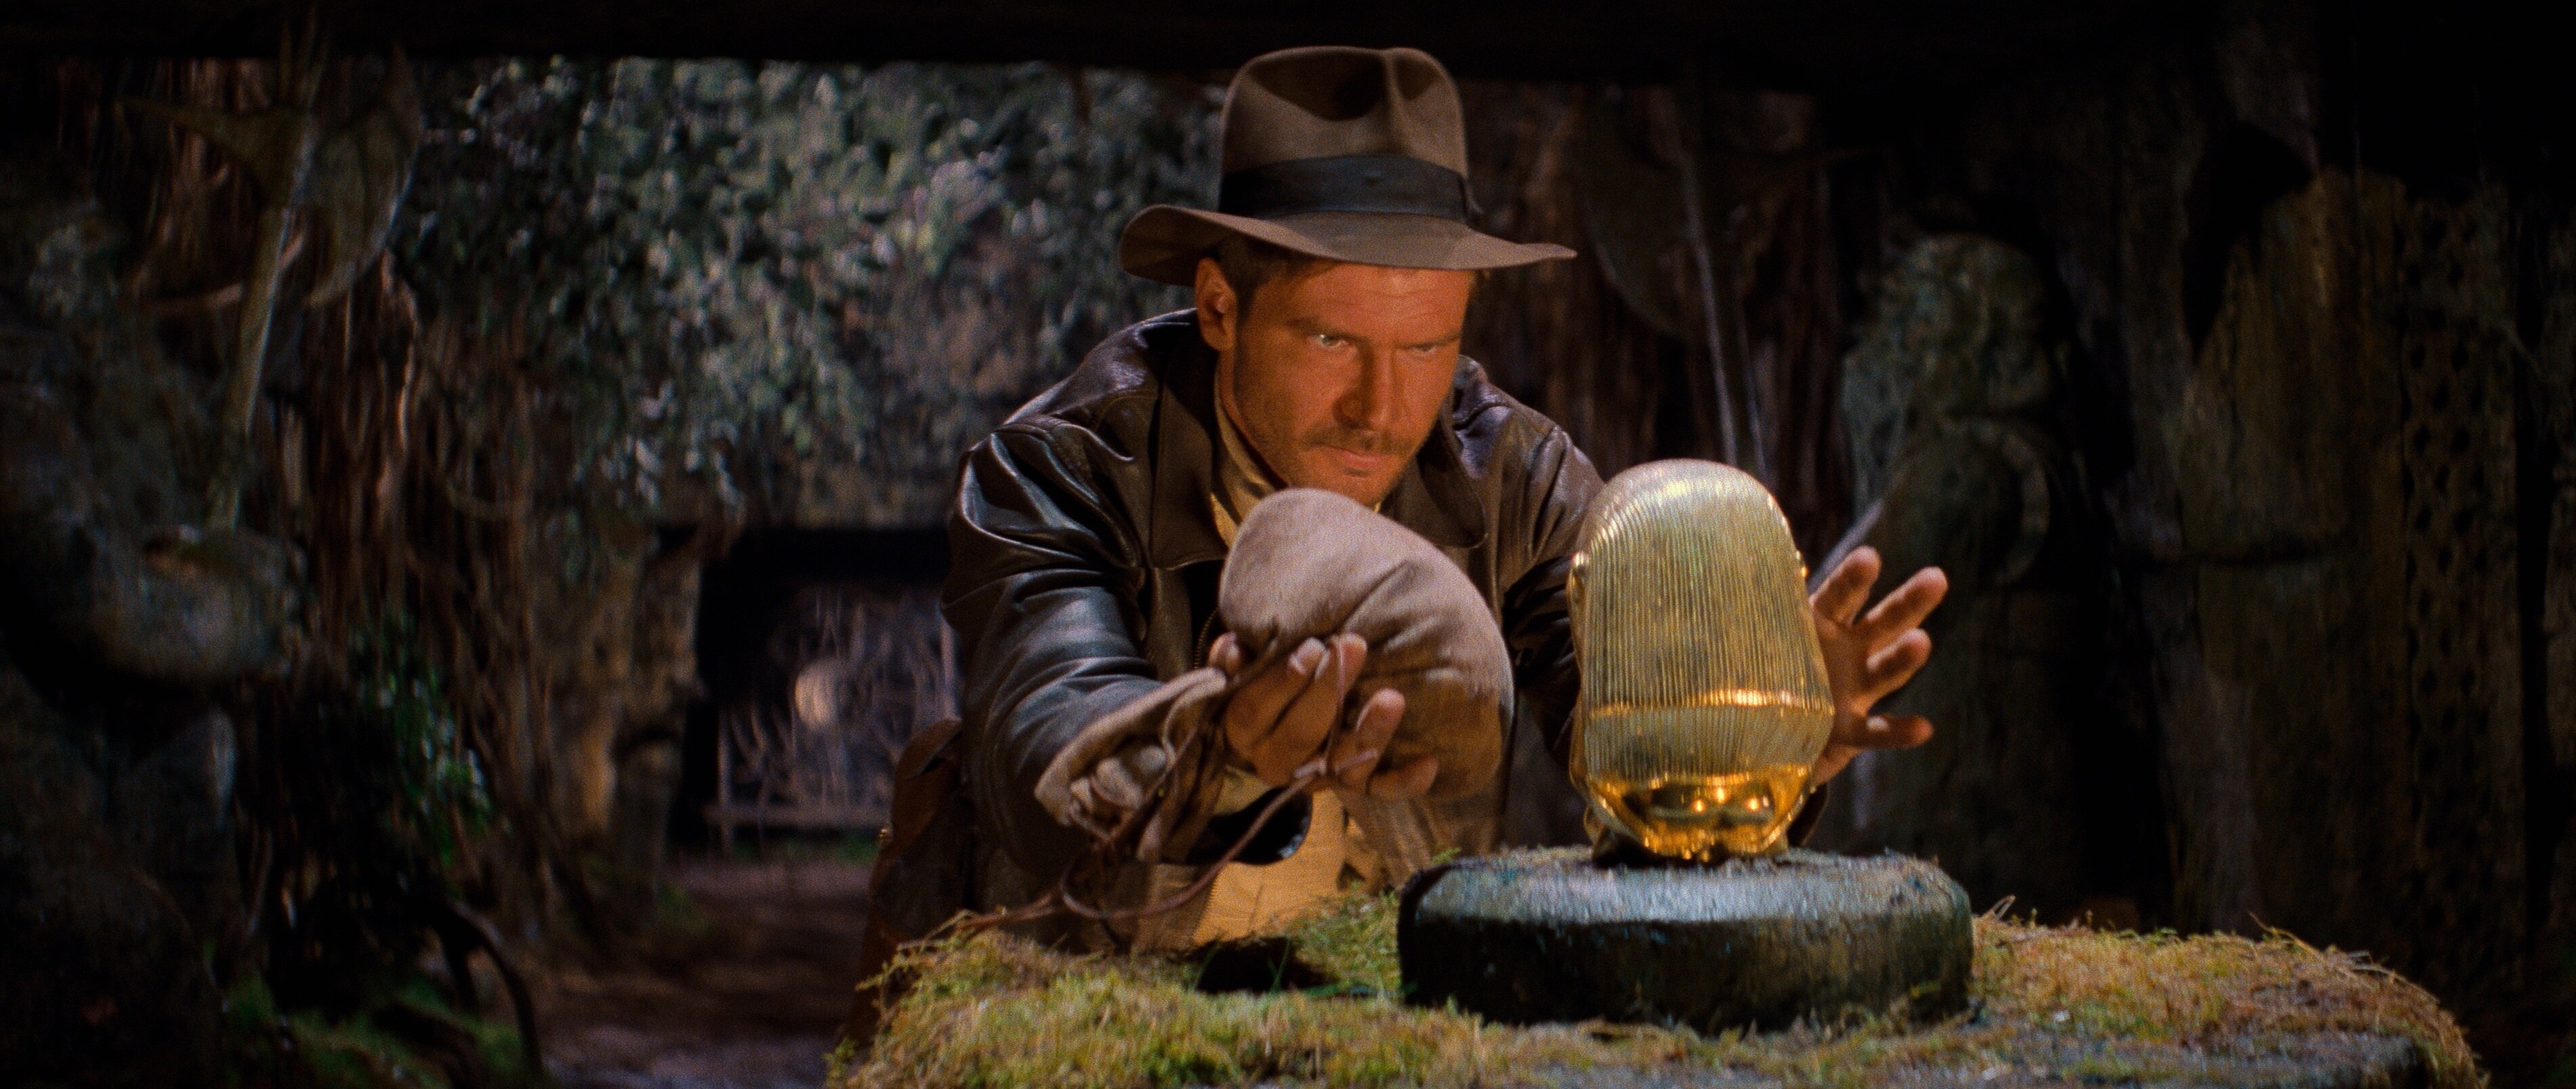 In Celebration Of The Upcoming Theatrical Release Of “Indiana Jones And The  Dial Of Destiny,” The “Indiana Jones” Collection Of Movies Swing Onto  Disney+ On May 31